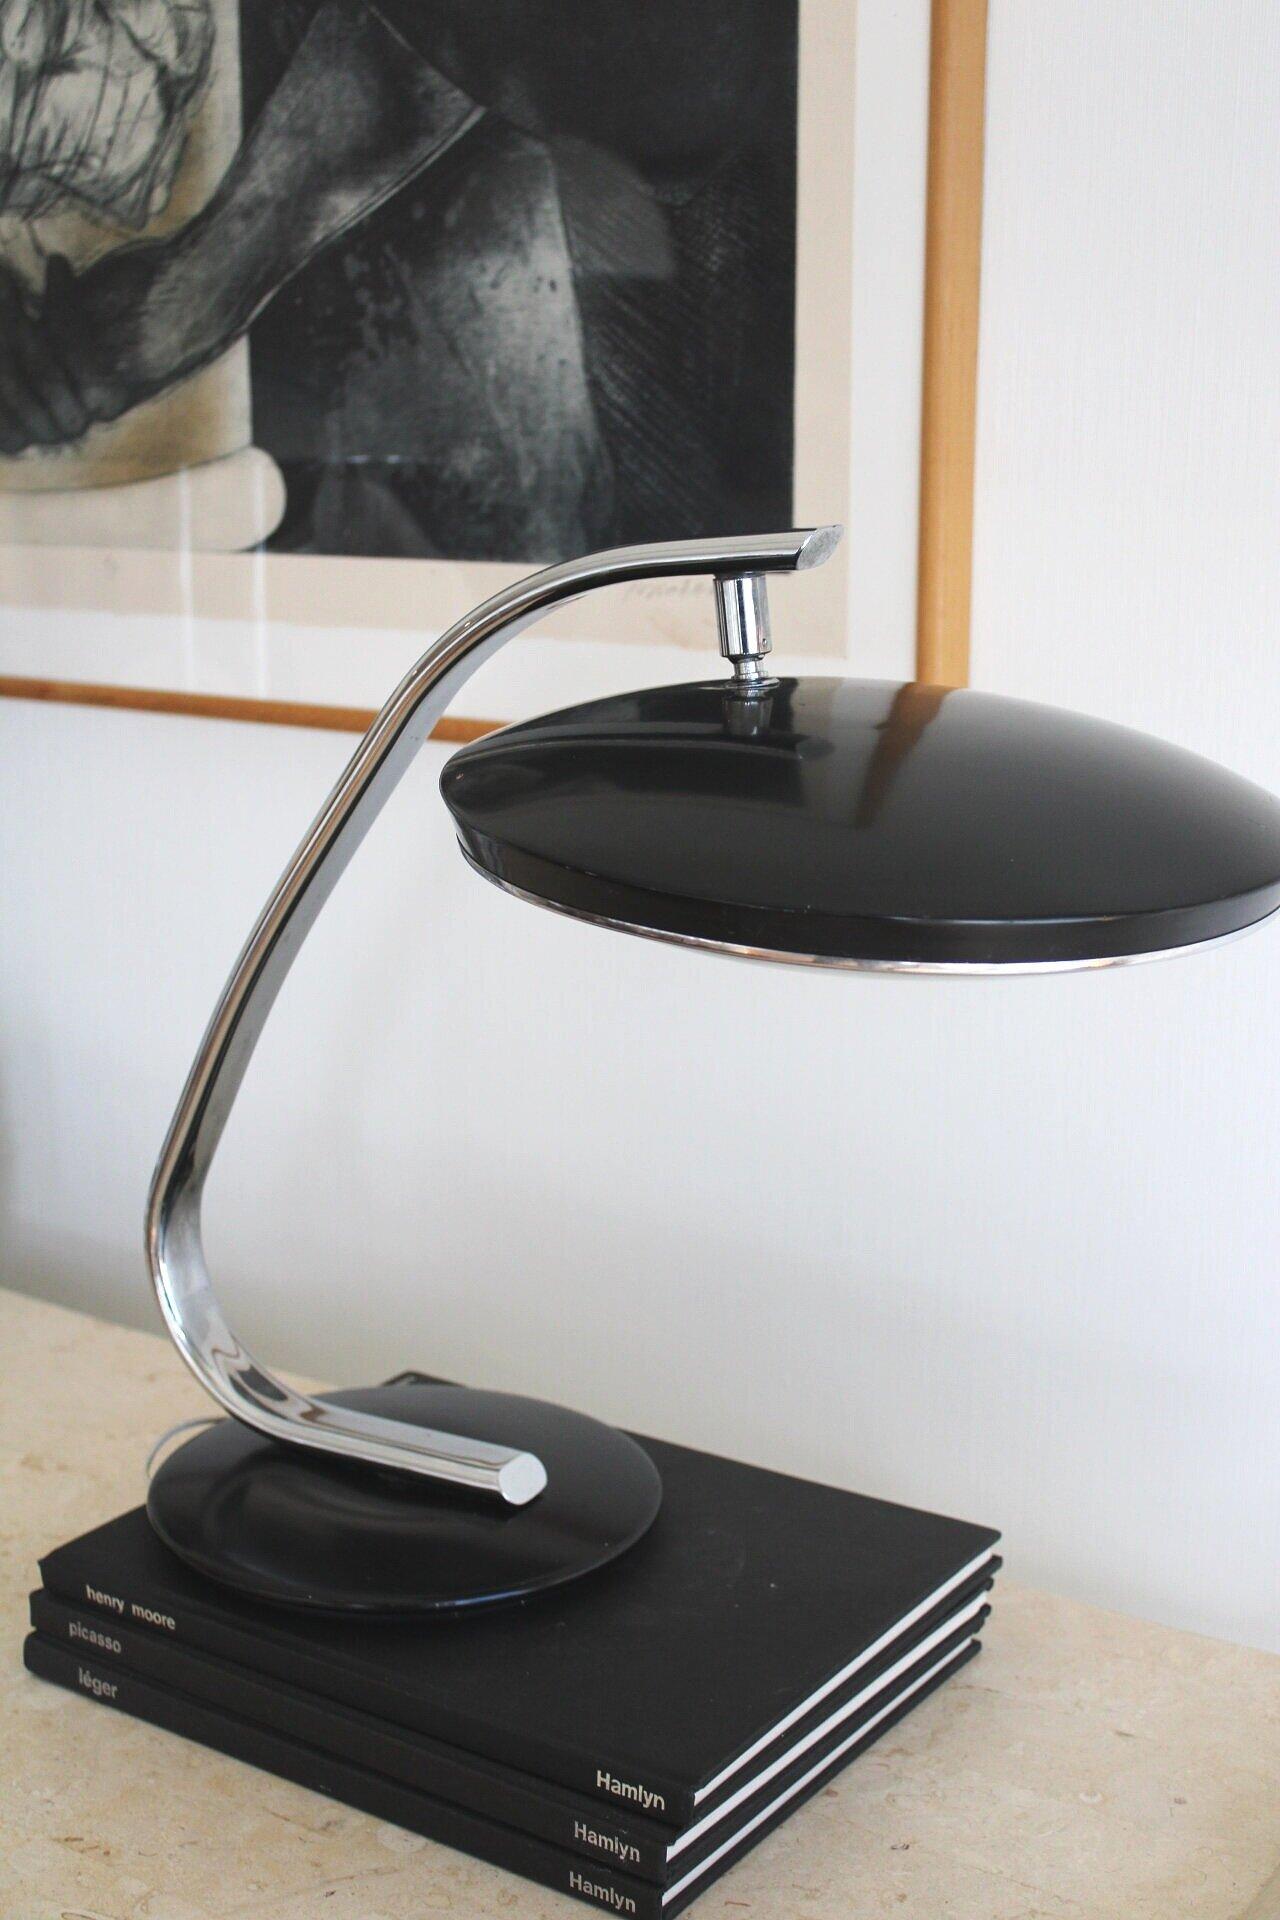 A sleek iconic design, highly sought after by collectors and designers alike by Martin Pedro. Originated from Spain. A beautiful mix of metal, chrome and glass diffuser that allows a soft glow. produced until 1980s. featuring clean lines, ball joint